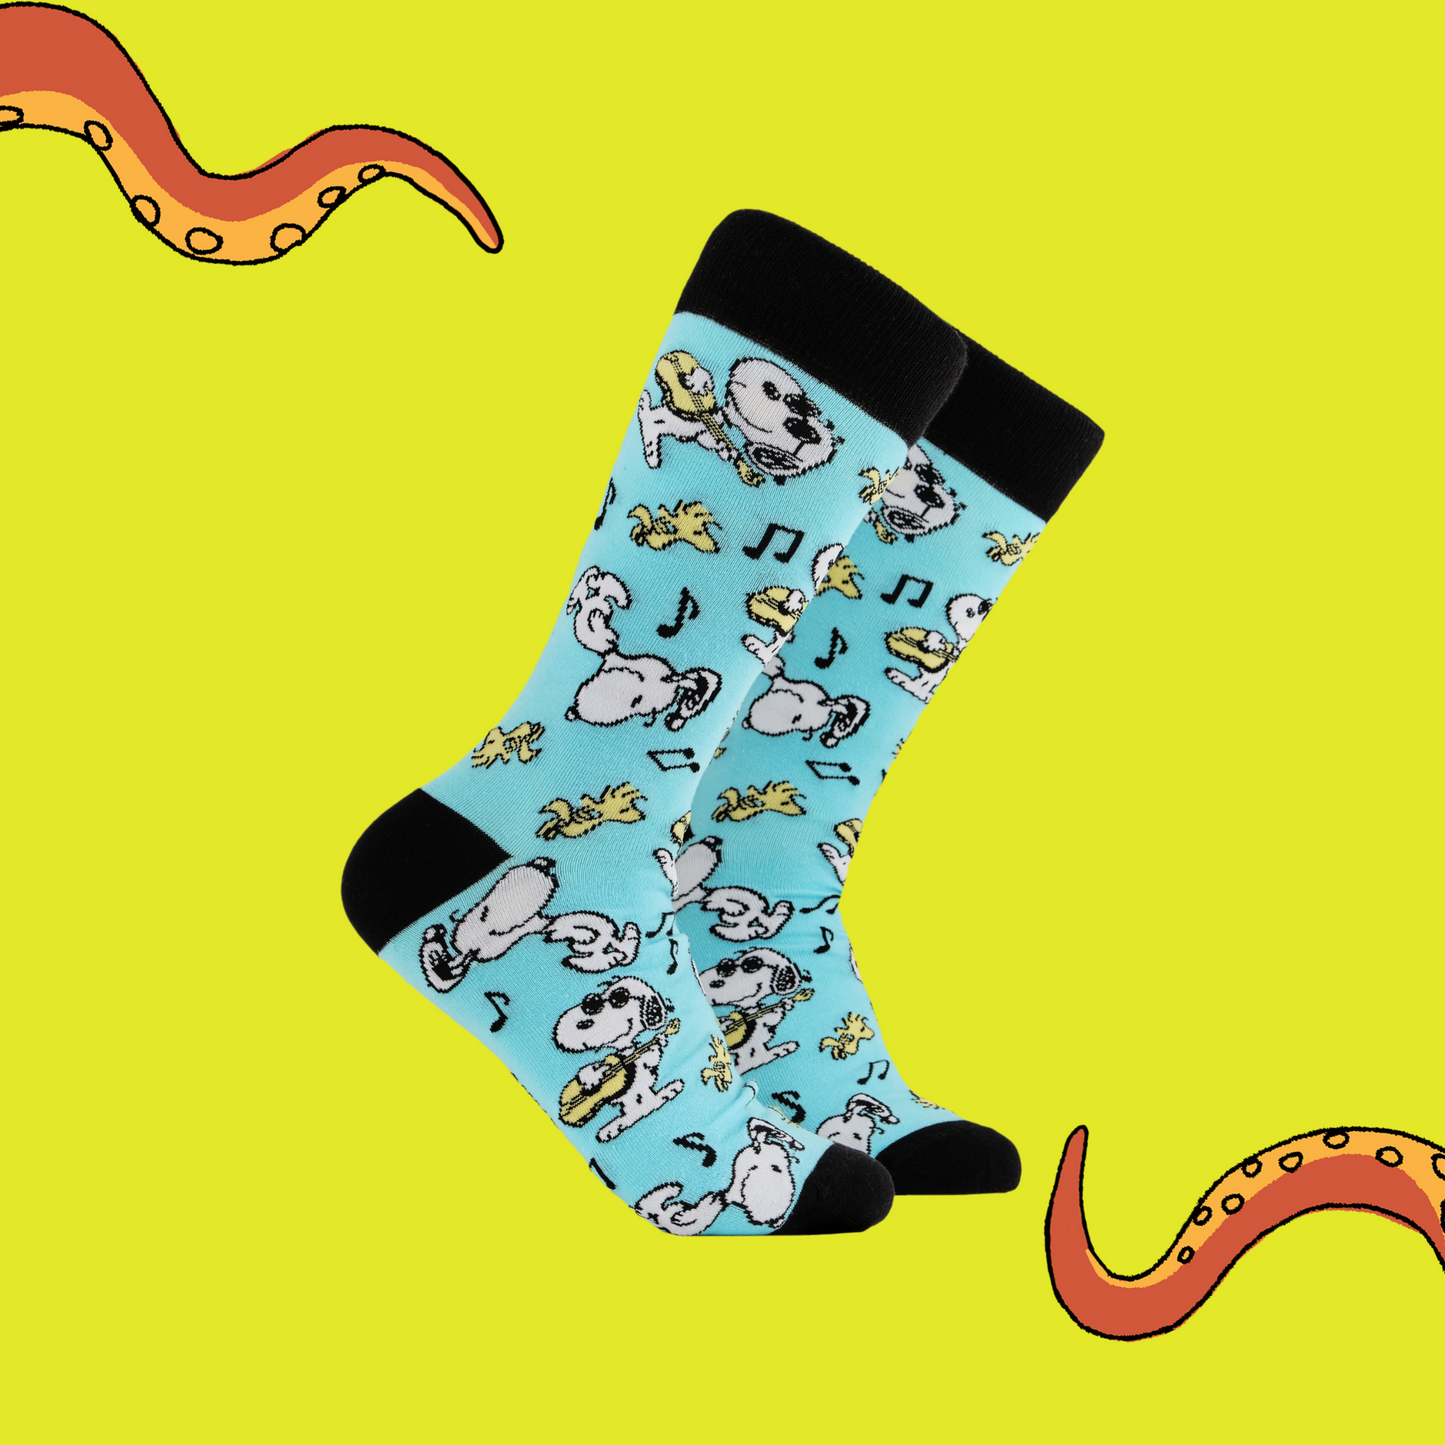 A pair of socks depicting snoopy and woodstock jamming. Turquoise legs, black cuff, heel and toe.